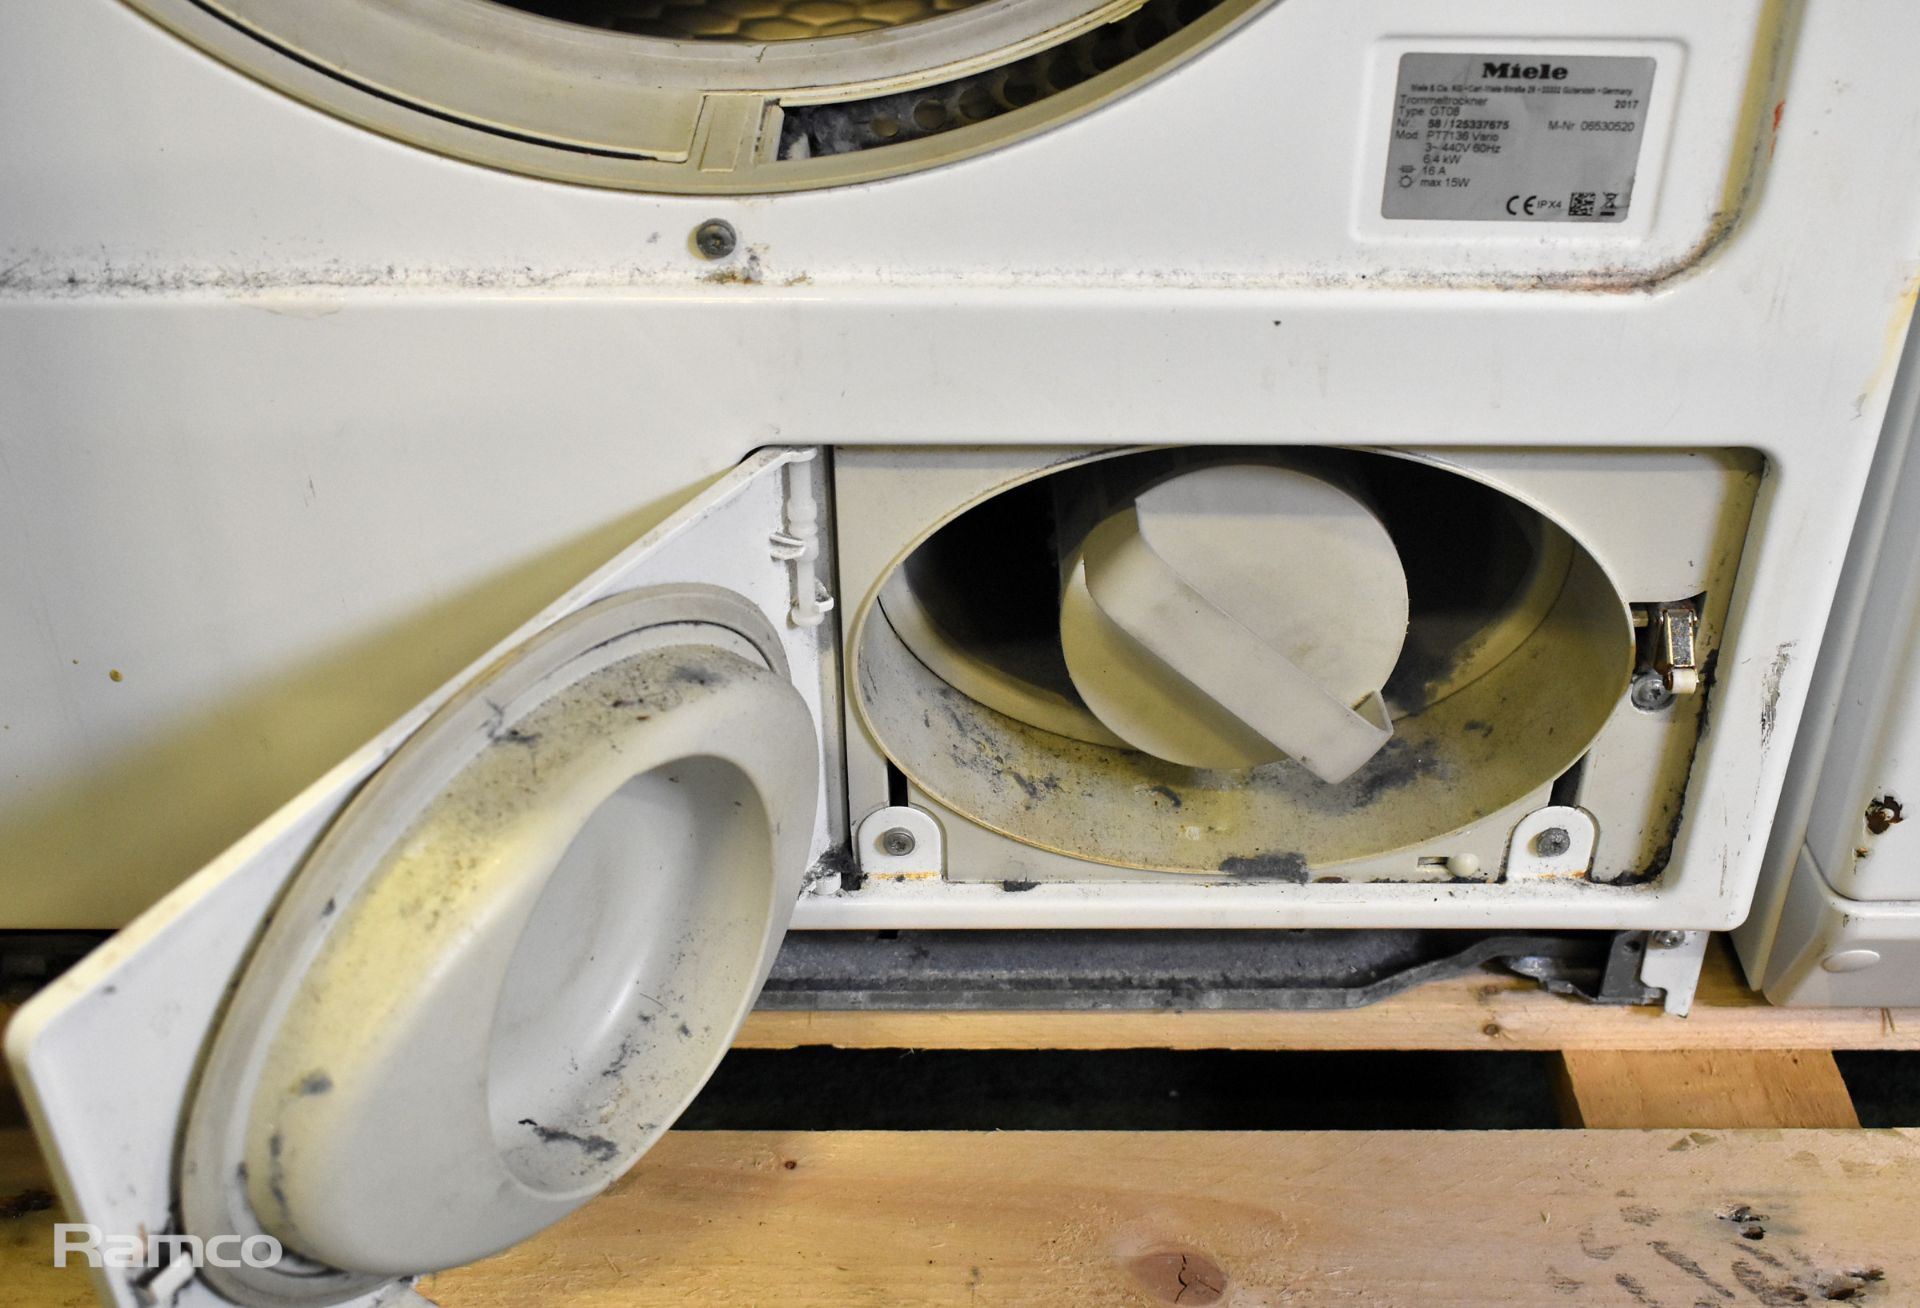 Miele PT 7136 6.5kg vented tumble dryer - W 595 x D 700 x H 850mm - MISSING KICK PLATE - Image 5 of 5